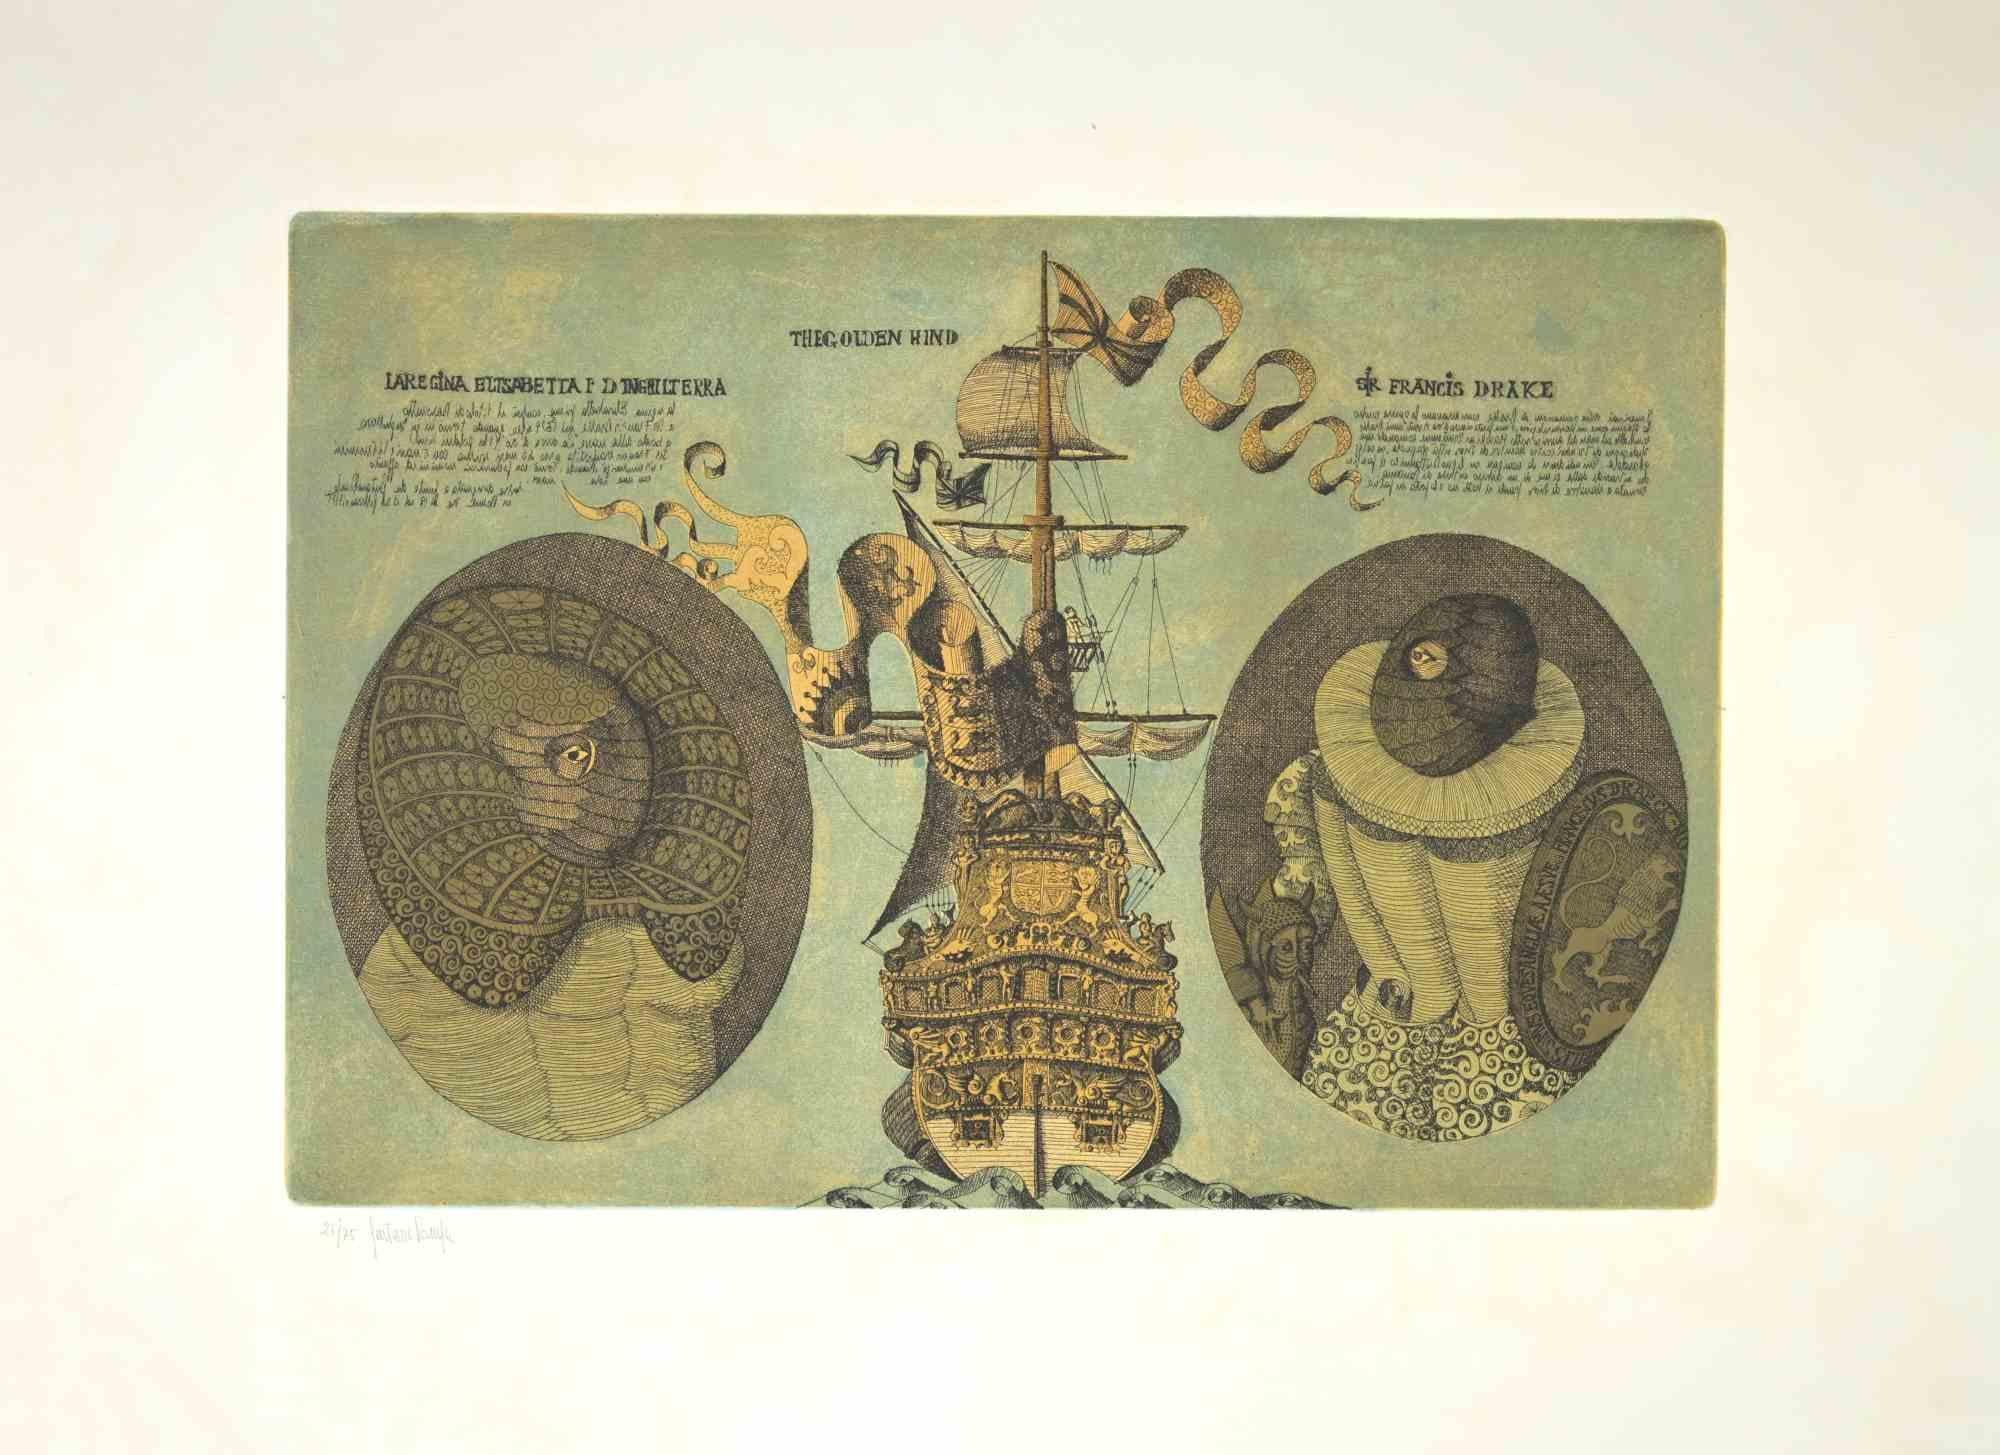 The Golden Hind is an artwork realized by Gaetano Pompa (1933, Forenza- 1998) in 1970s.

The artwork is  an aquatint and etching on paper.

Hand signed on the left corner. Edition of 75, numbered, 26. 

Good condition.

Gaetano Pompa  was born in